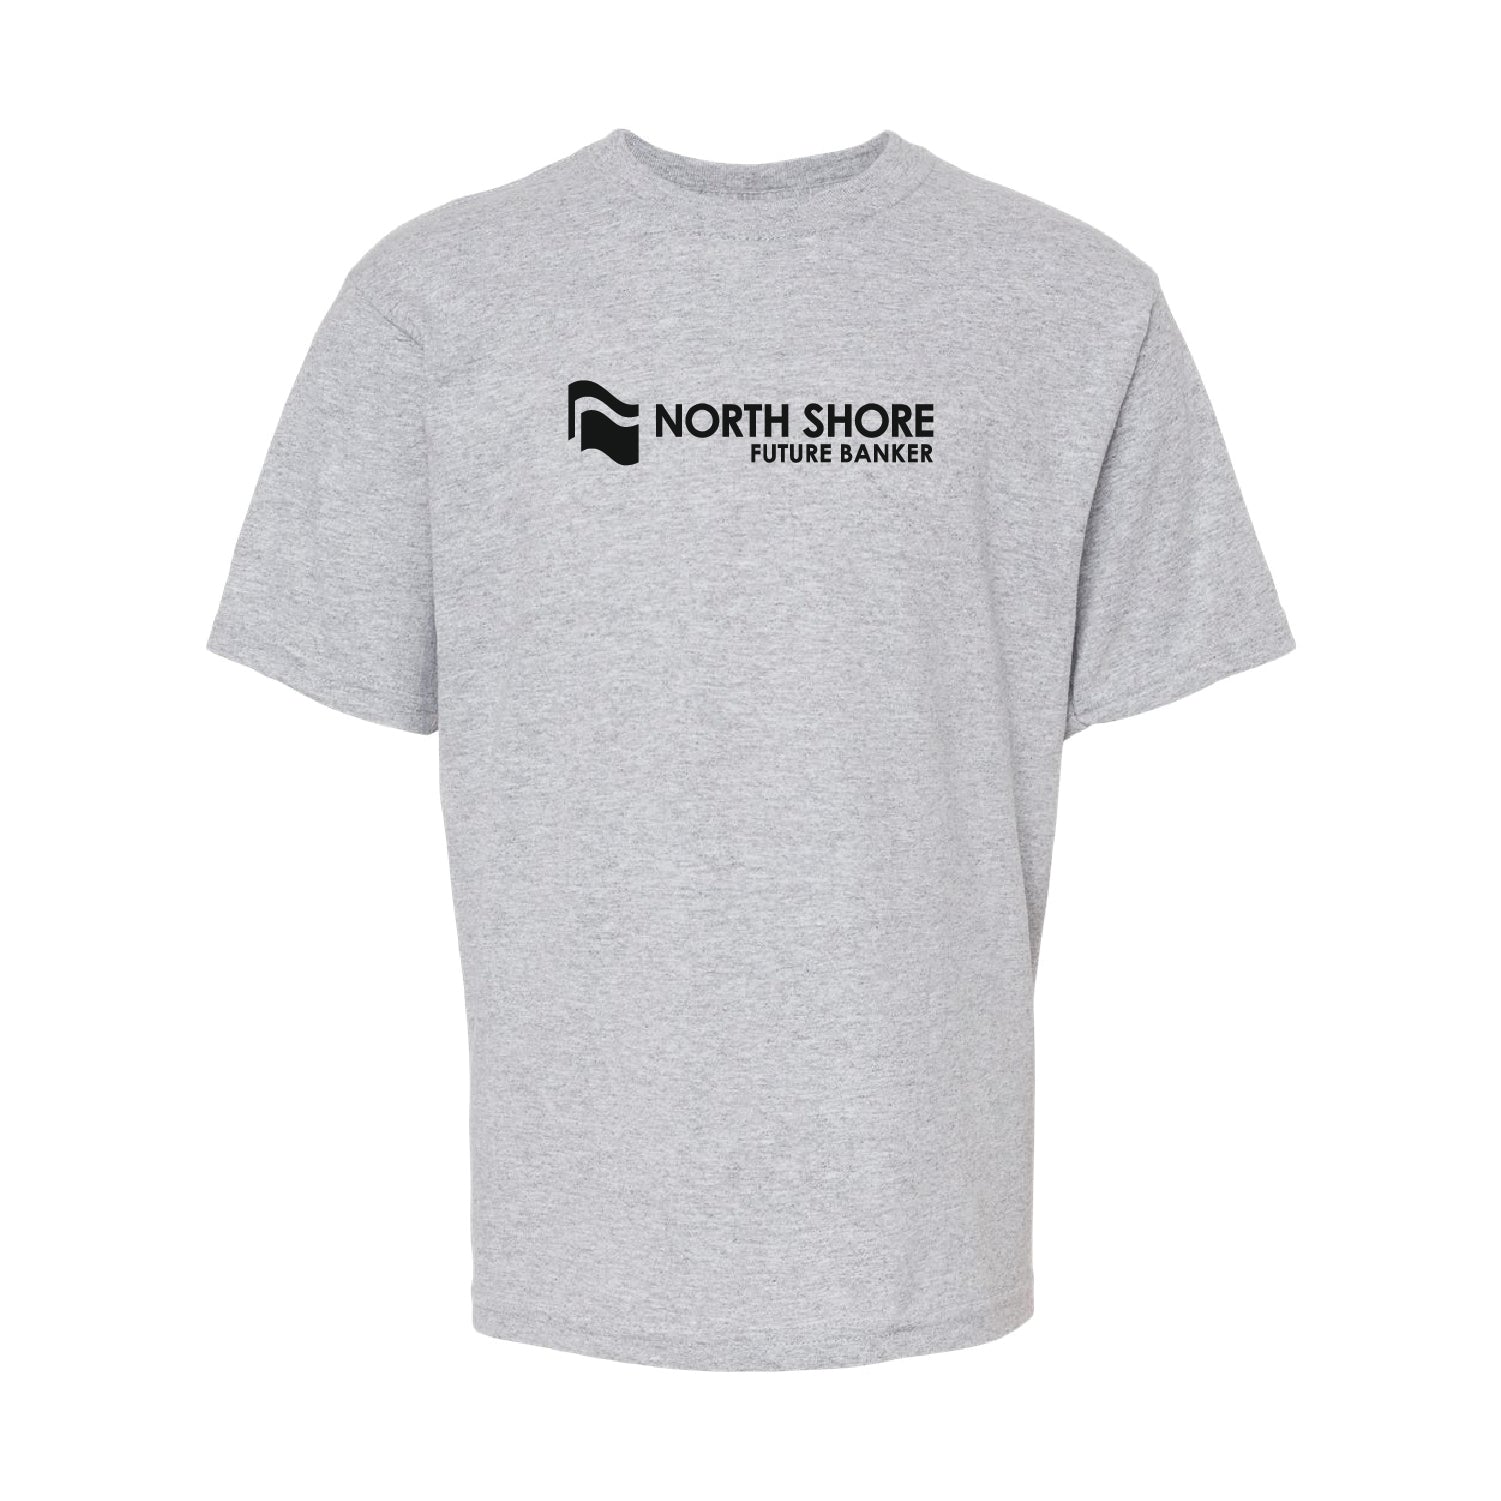 NSB Mortgage Youth Gold Soft Touch T-Shirt - DSP On Demand